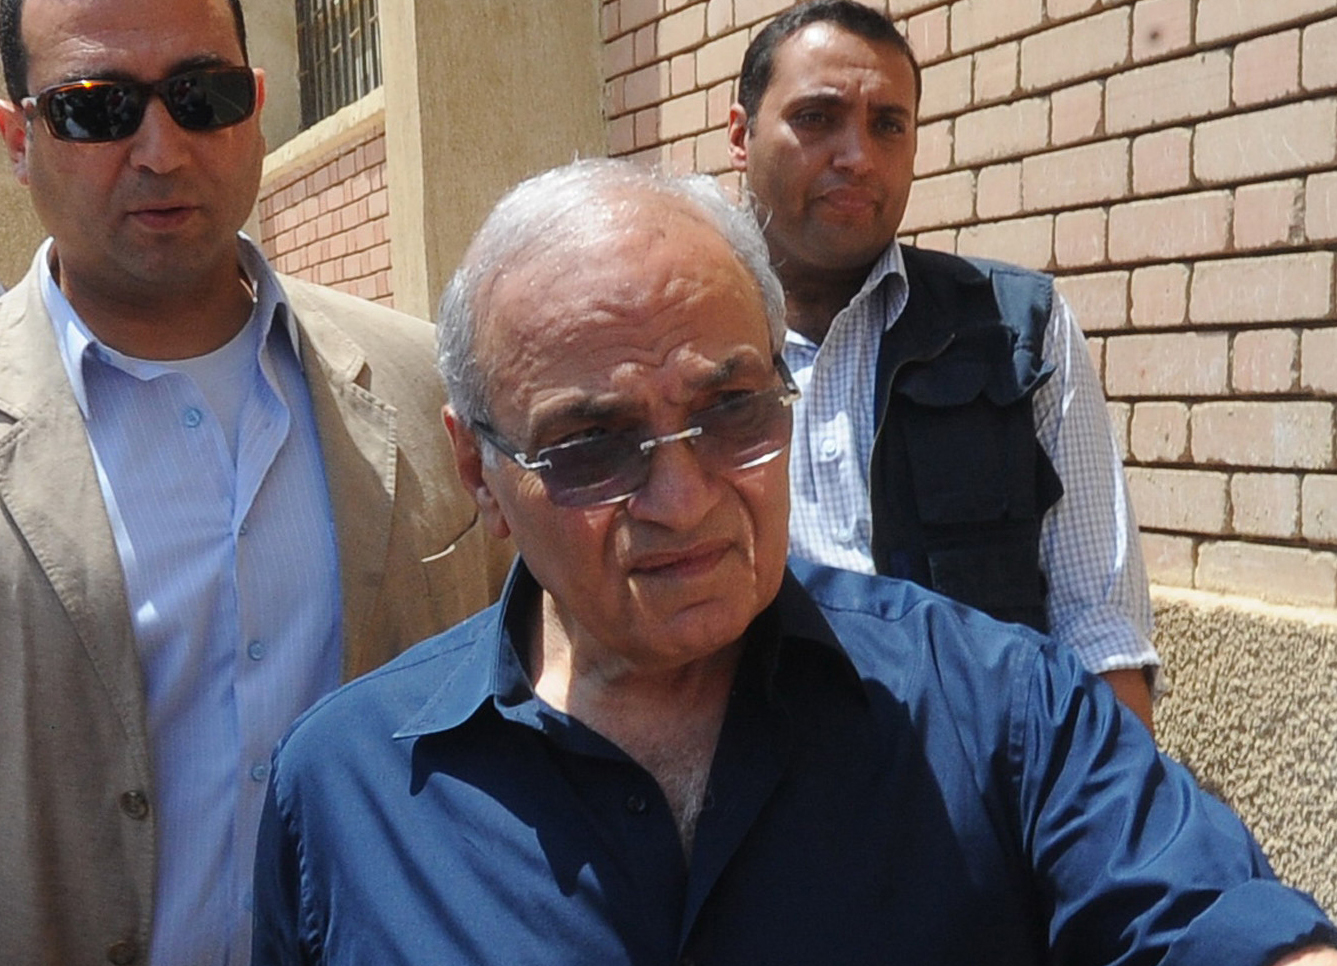 Ahmed Shafiq has had all assets frozen by the IGA. (Photo by Mohamed Omar)